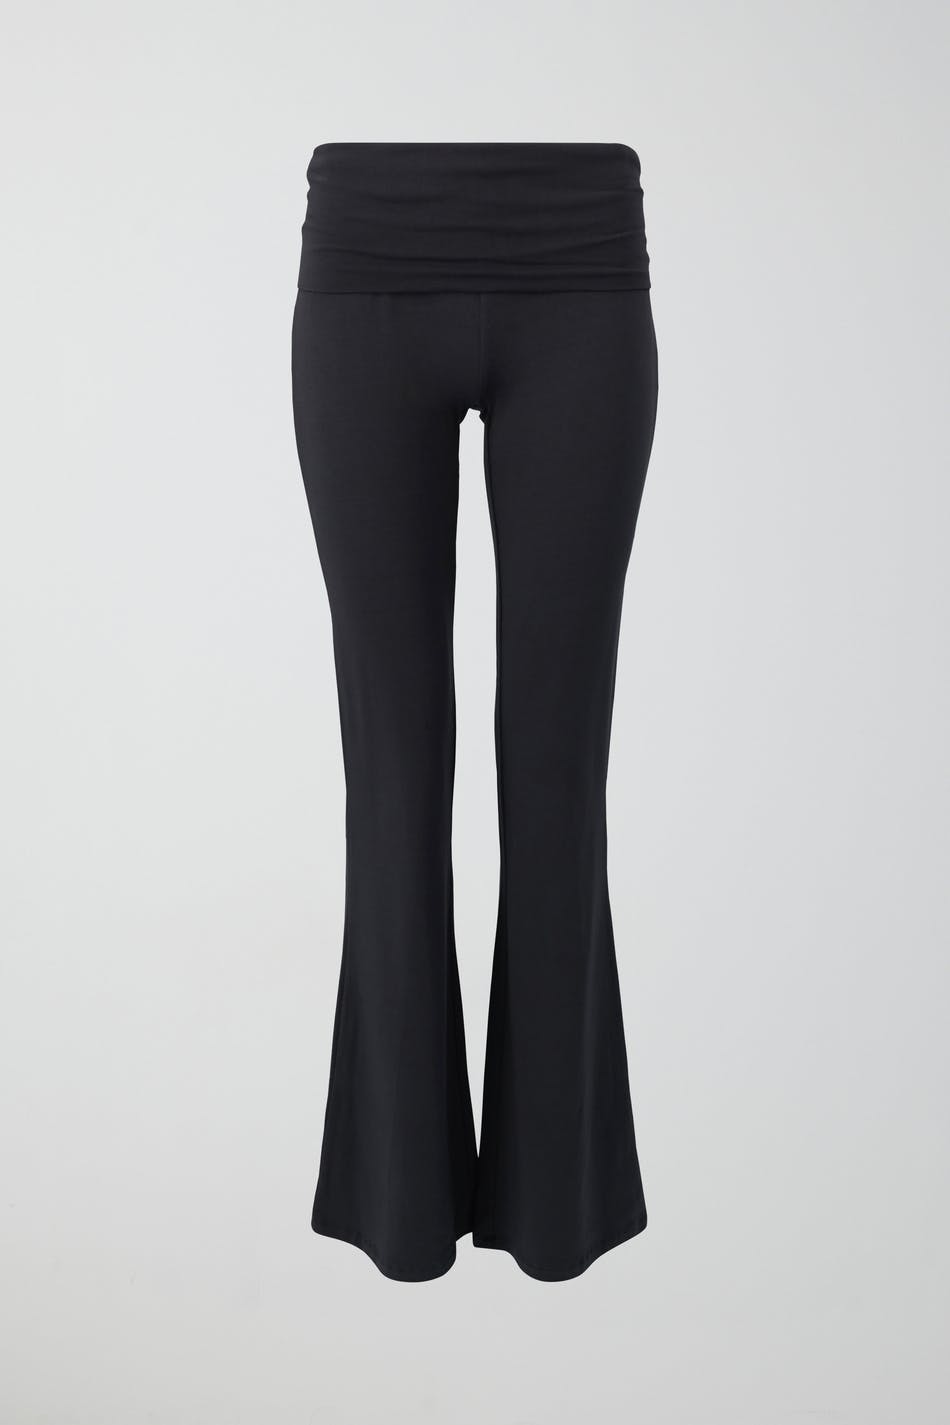 Gina Tricot - Soft touch tall folded flare trousers - yoga-pants - Black - XS - Female